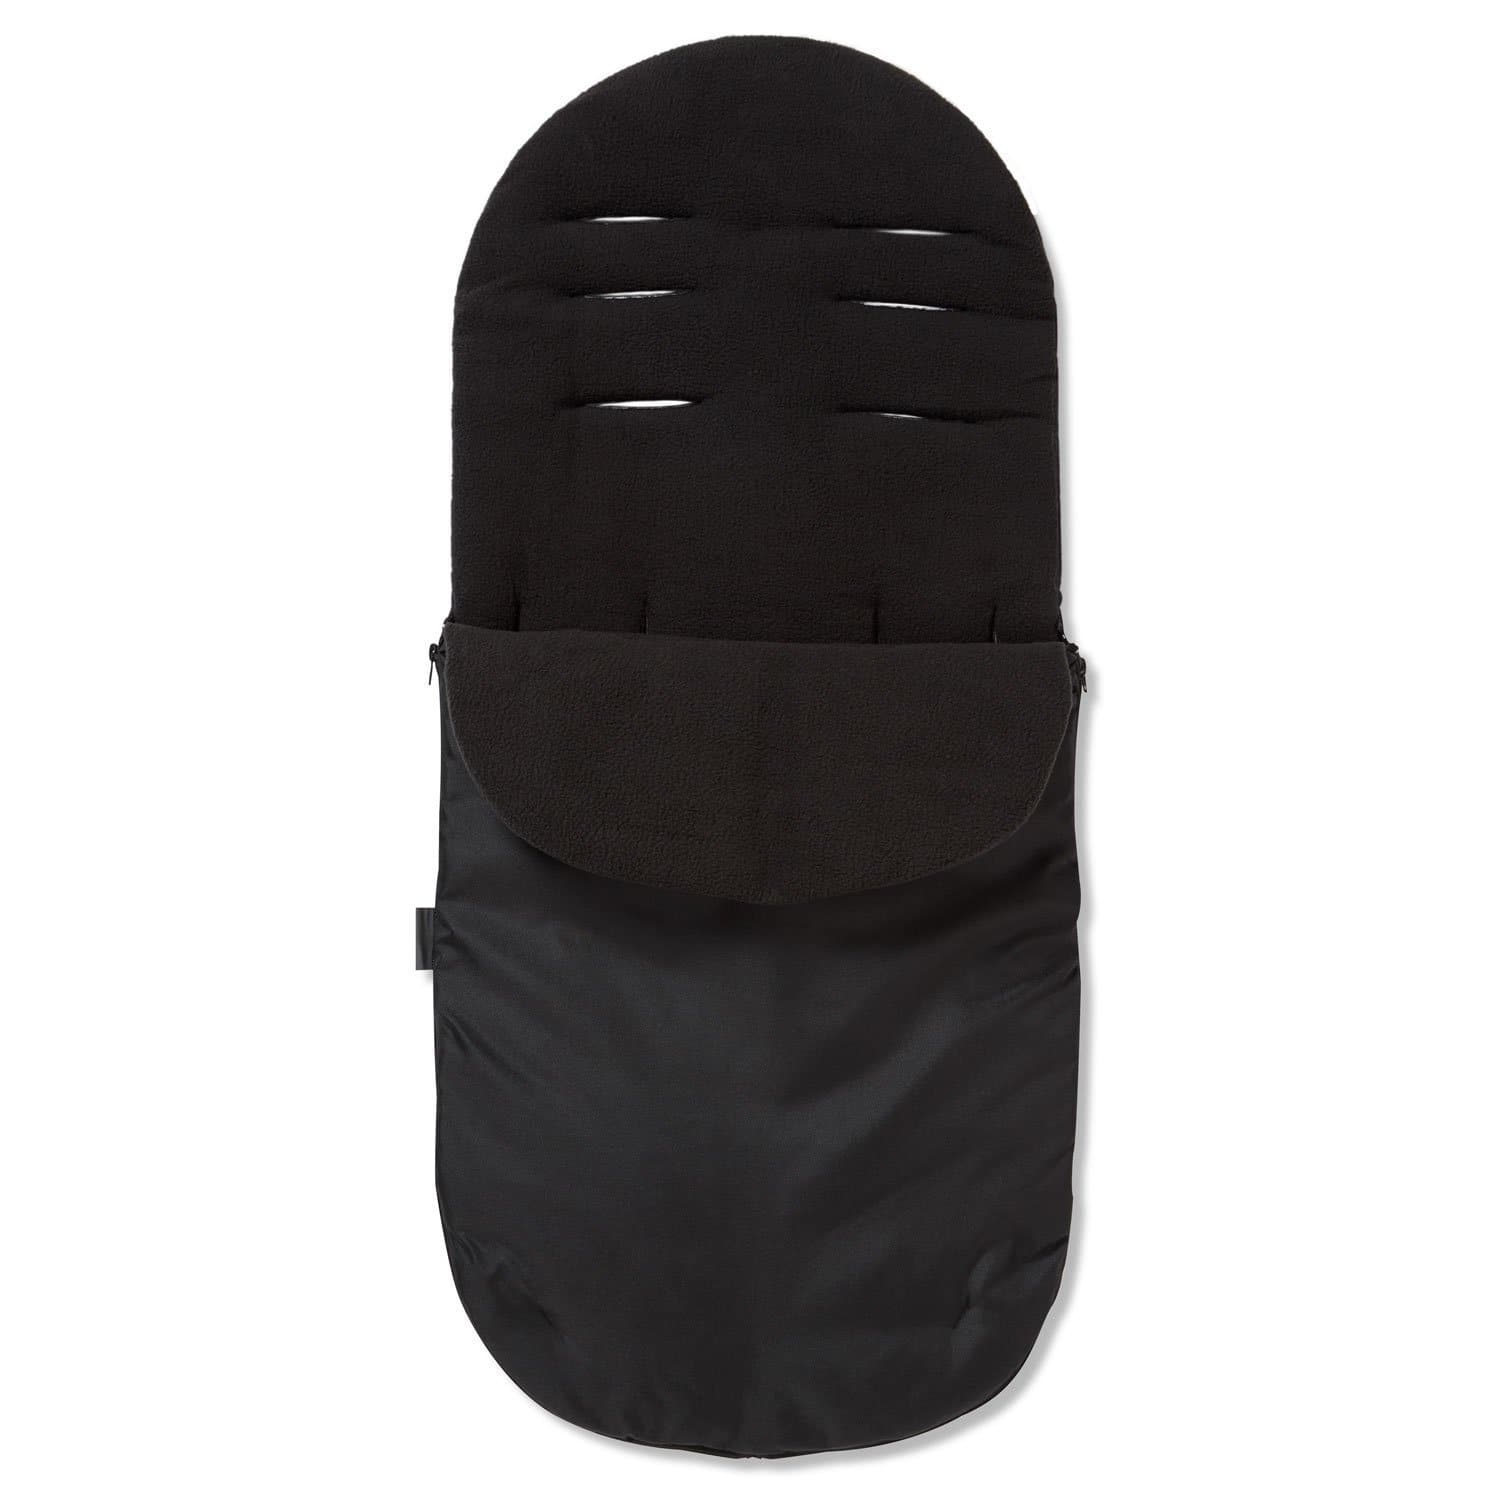 Footmuff / Cosy Toes Compatible with My Child - Black / Fits All Models | For Your Little One